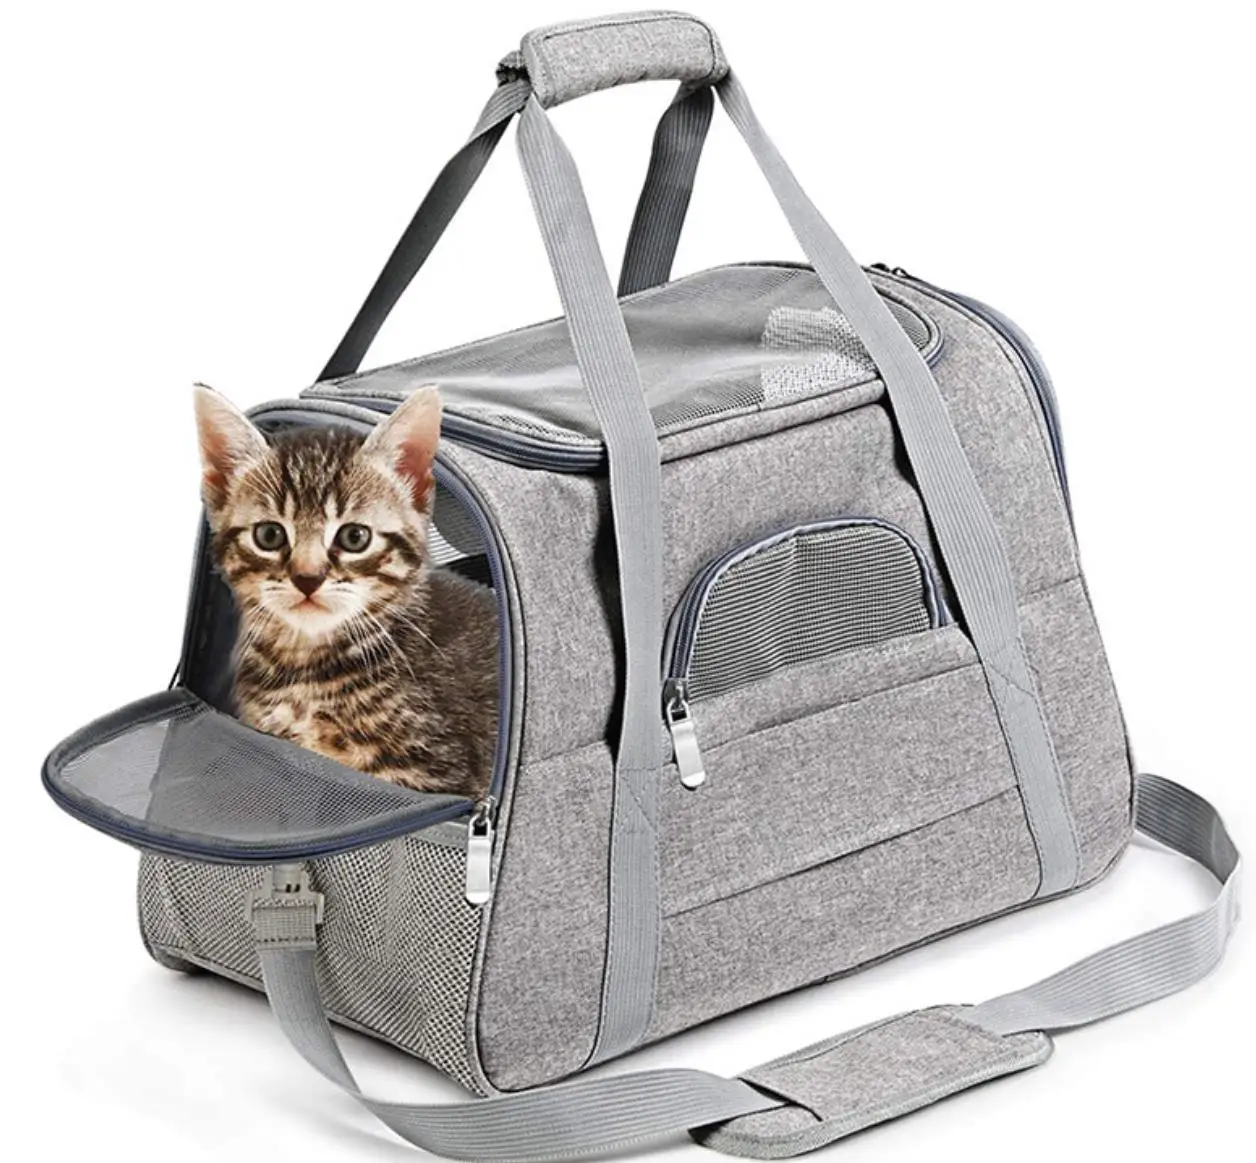 

2020 New Cabin Pet Carrier Soft Sided Warm Bottom Mat Large Space Fat Cat 8kg Dog Travel In Vehicles Airline Approved, Customized